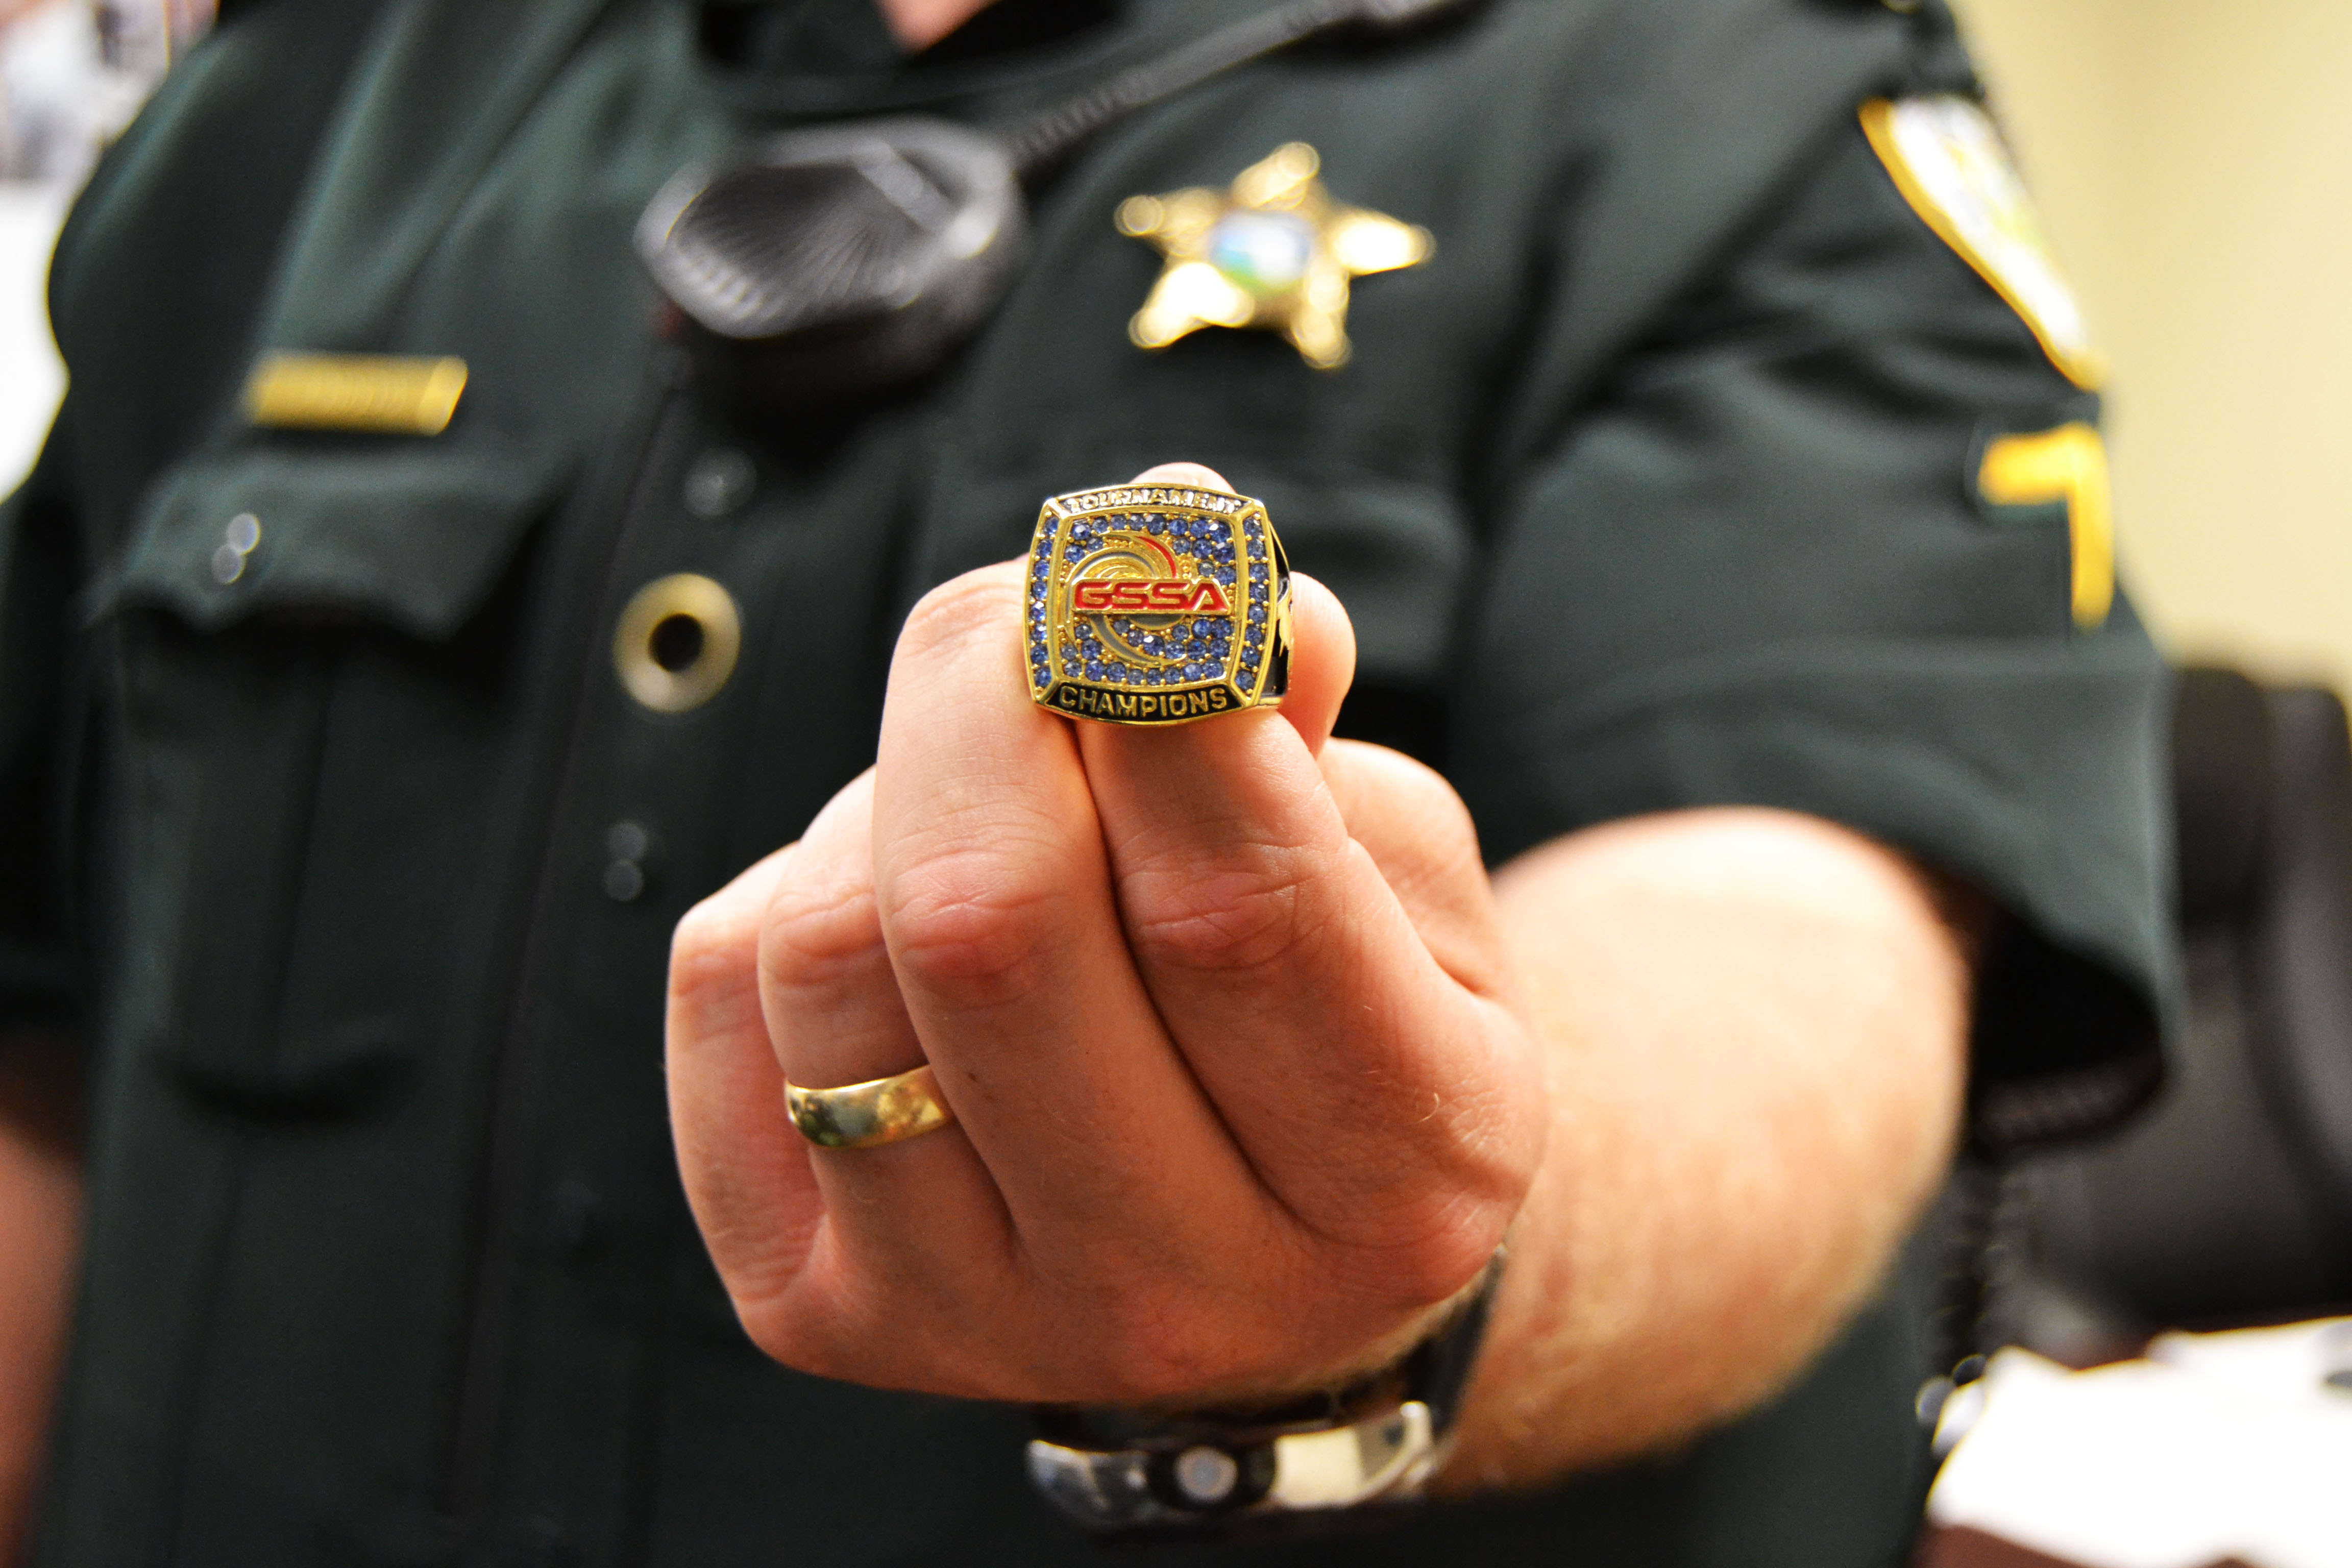 LITTLE LEAGUE STATE CHAMPIONSHIP RING RECOVERED FOLLOWING BURGLARY